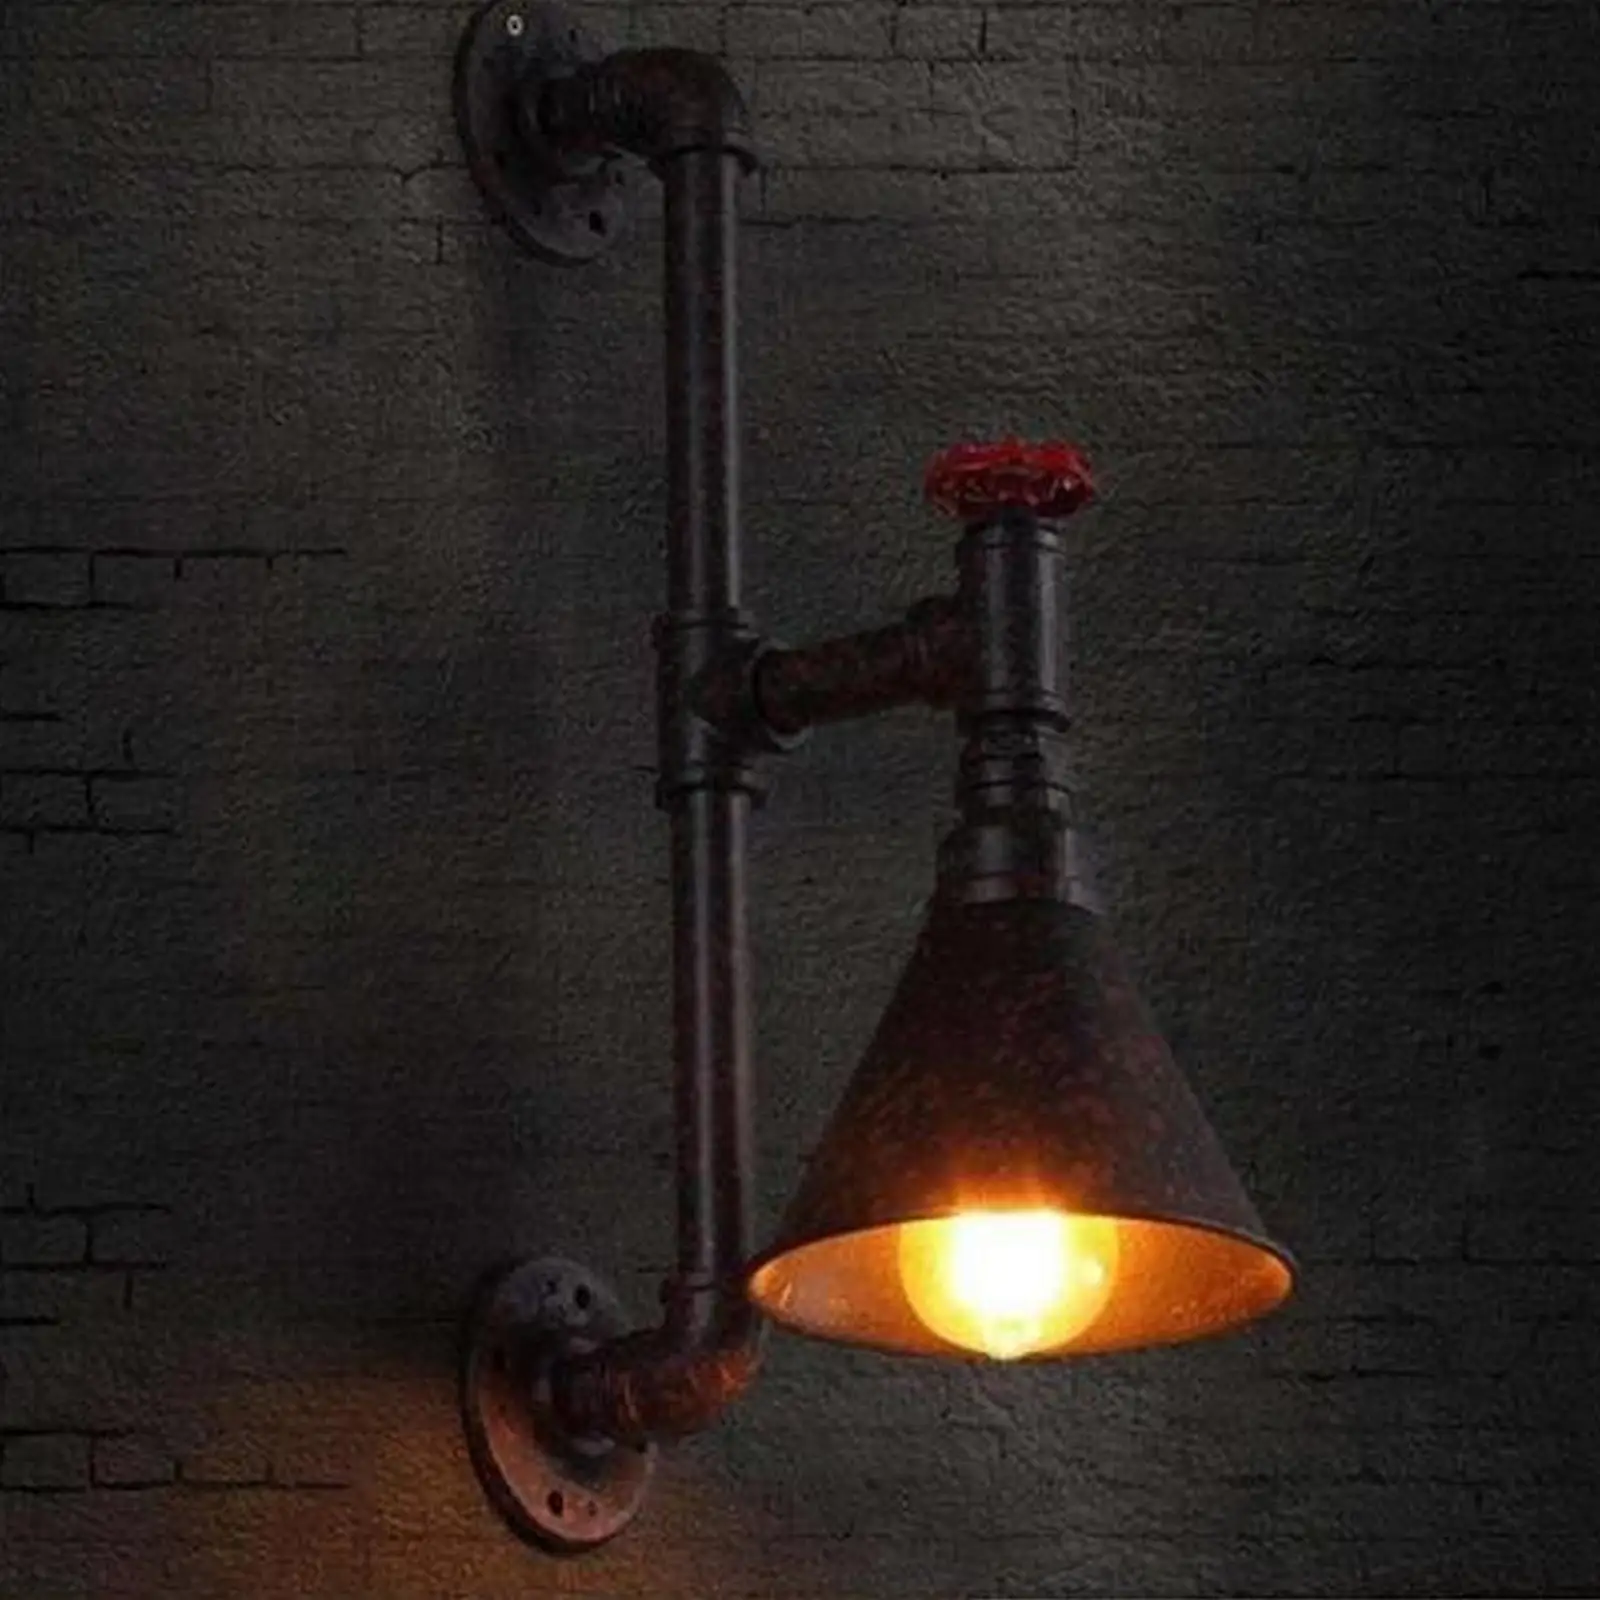 3/4inch Globe Valve Light Switch Vintage with Wire Accessory Industrial Steampunk Style Parts Supplies for Desk Lamp